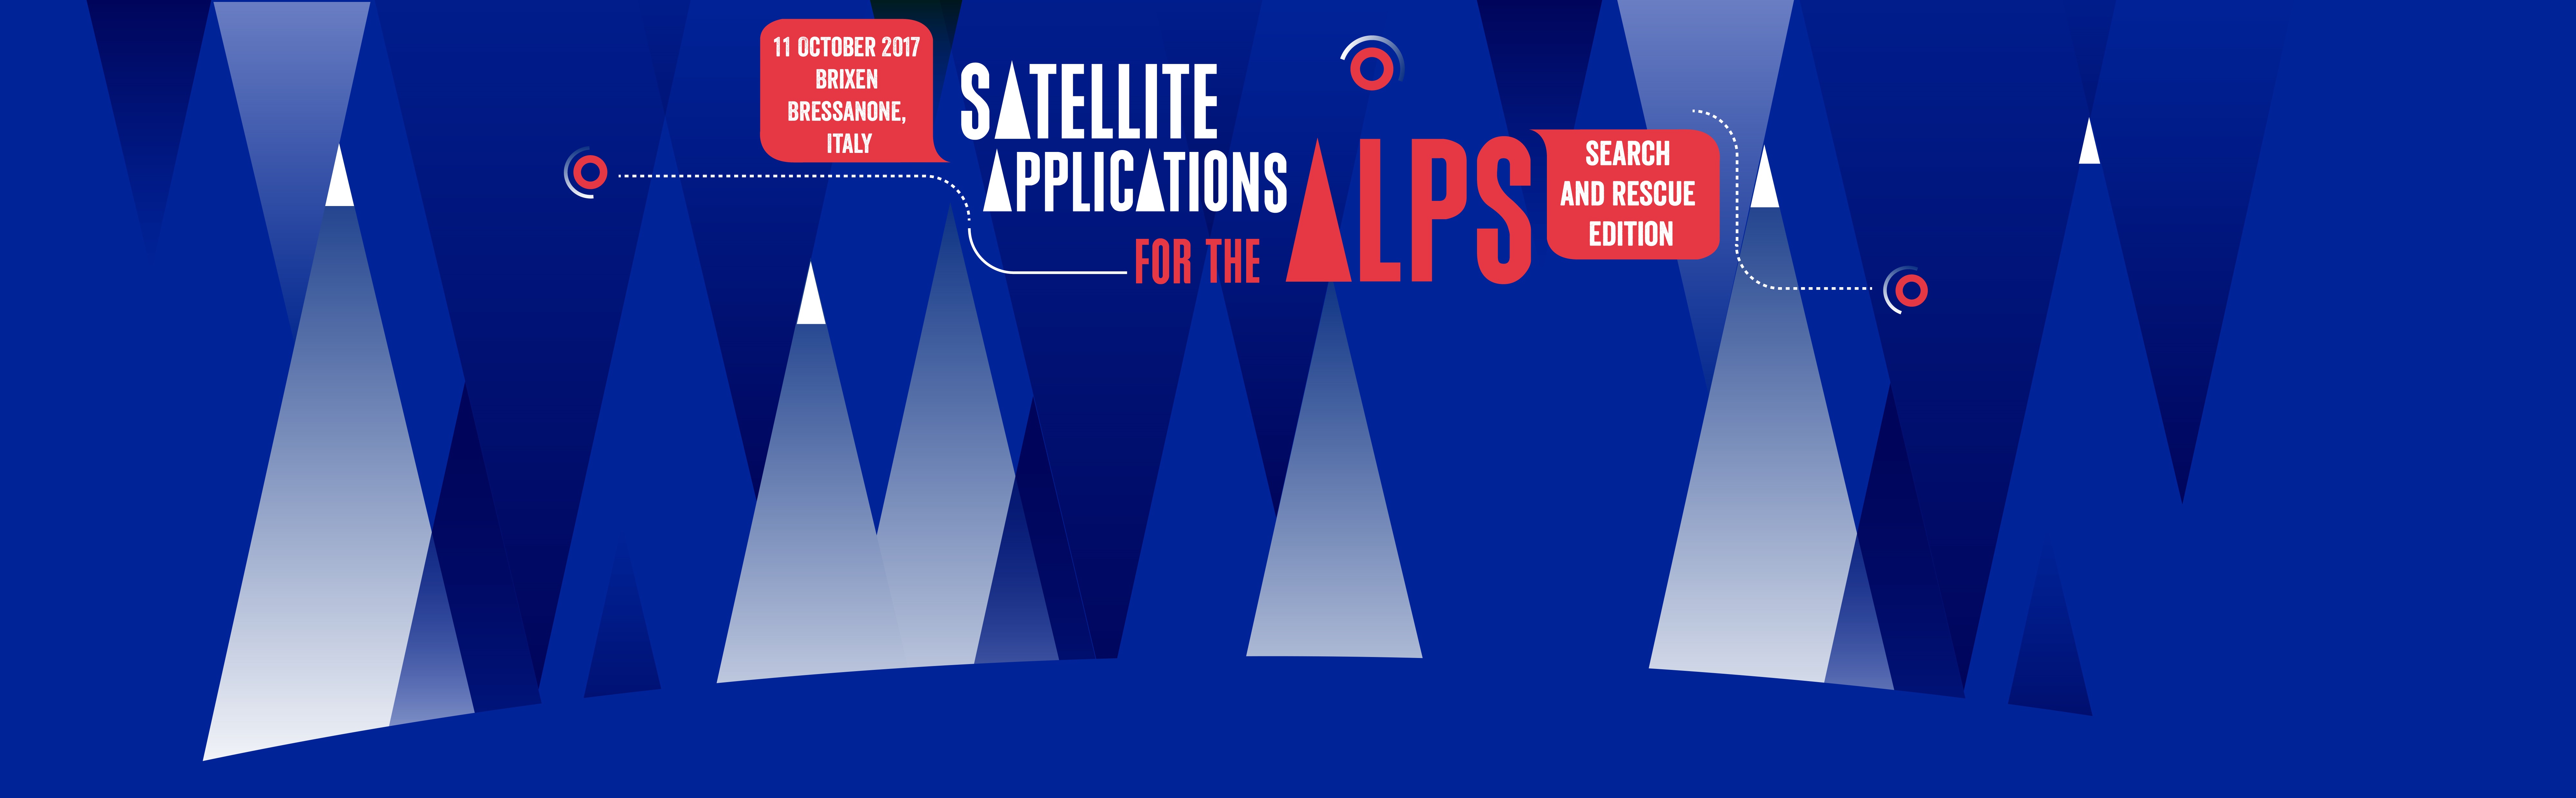 Satellite Applications for the Alps: Search and Rescue